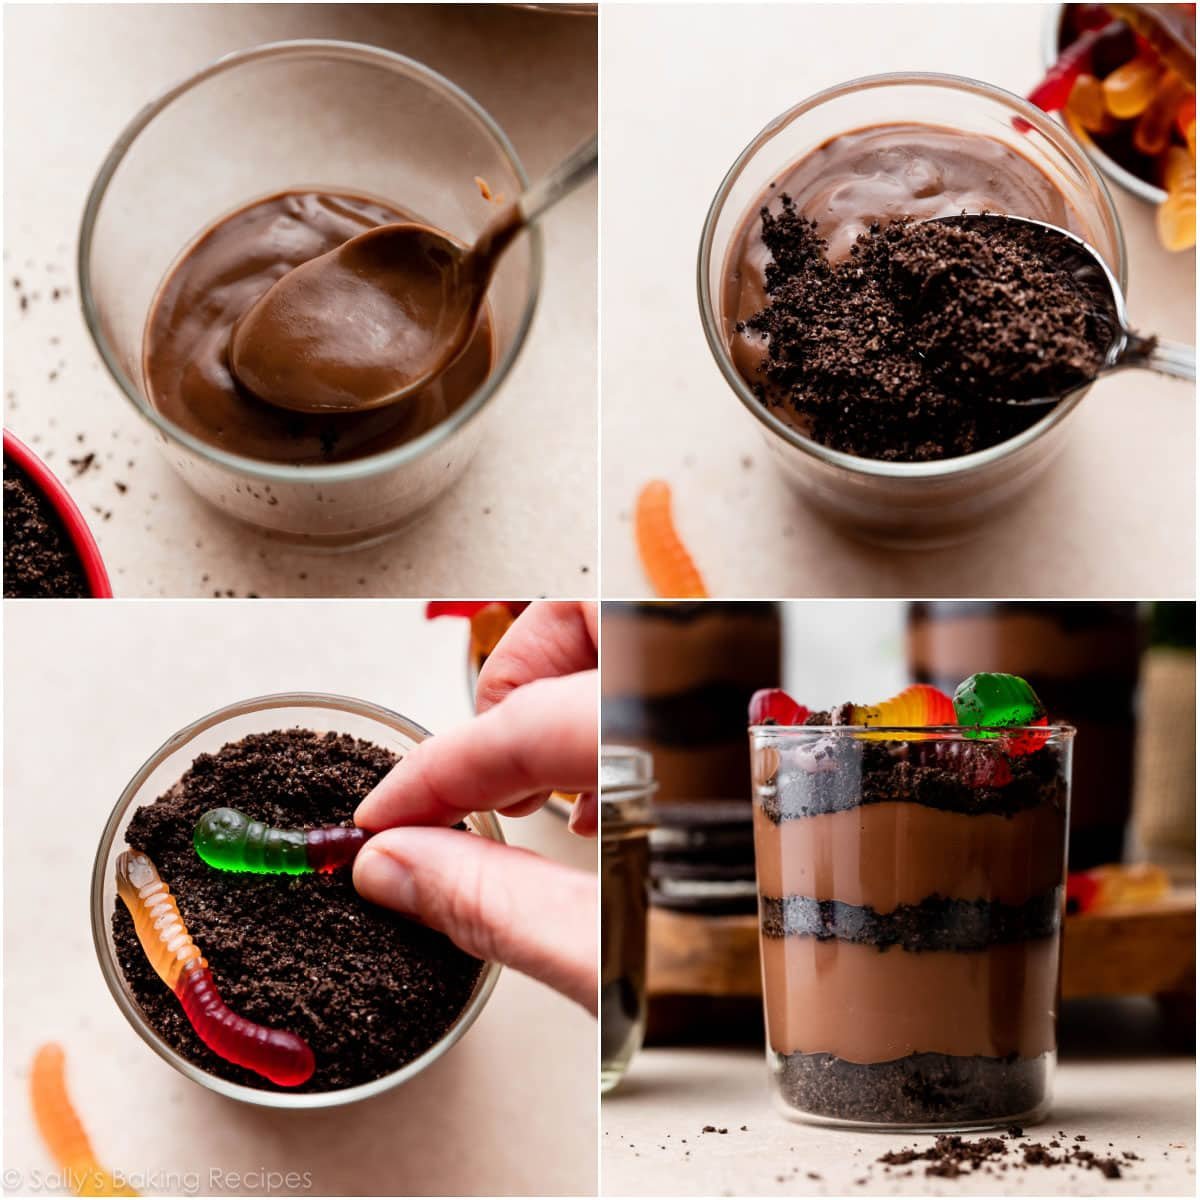 4-photo collage showing layering homemade chocolate pudding, crushed Oreo cookies, and gummy worms in a glass cup.